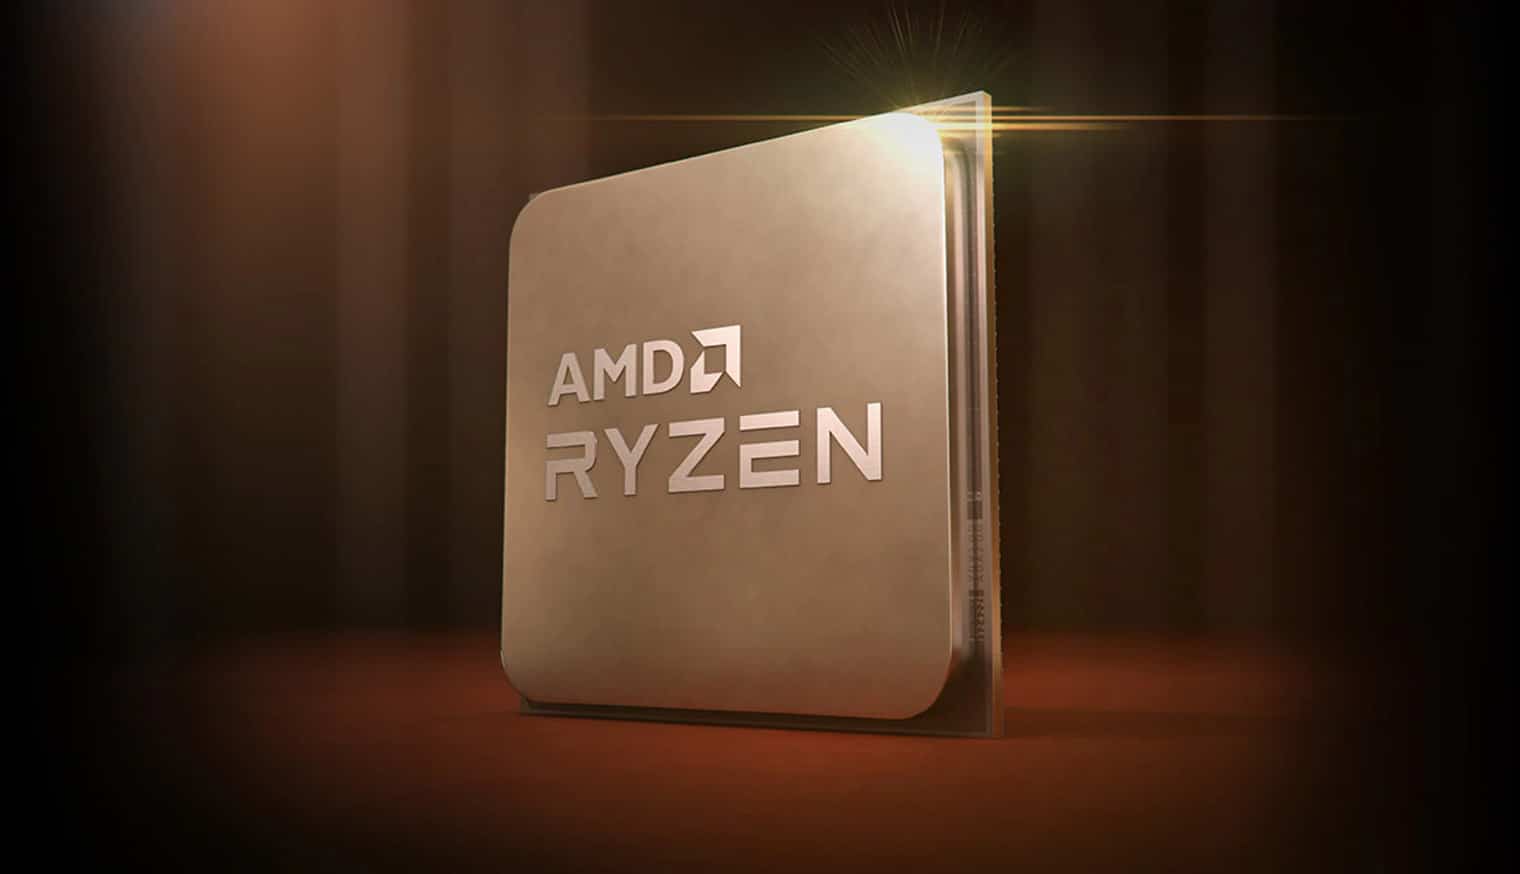 AMD Ryzen processor standing upright on a red background